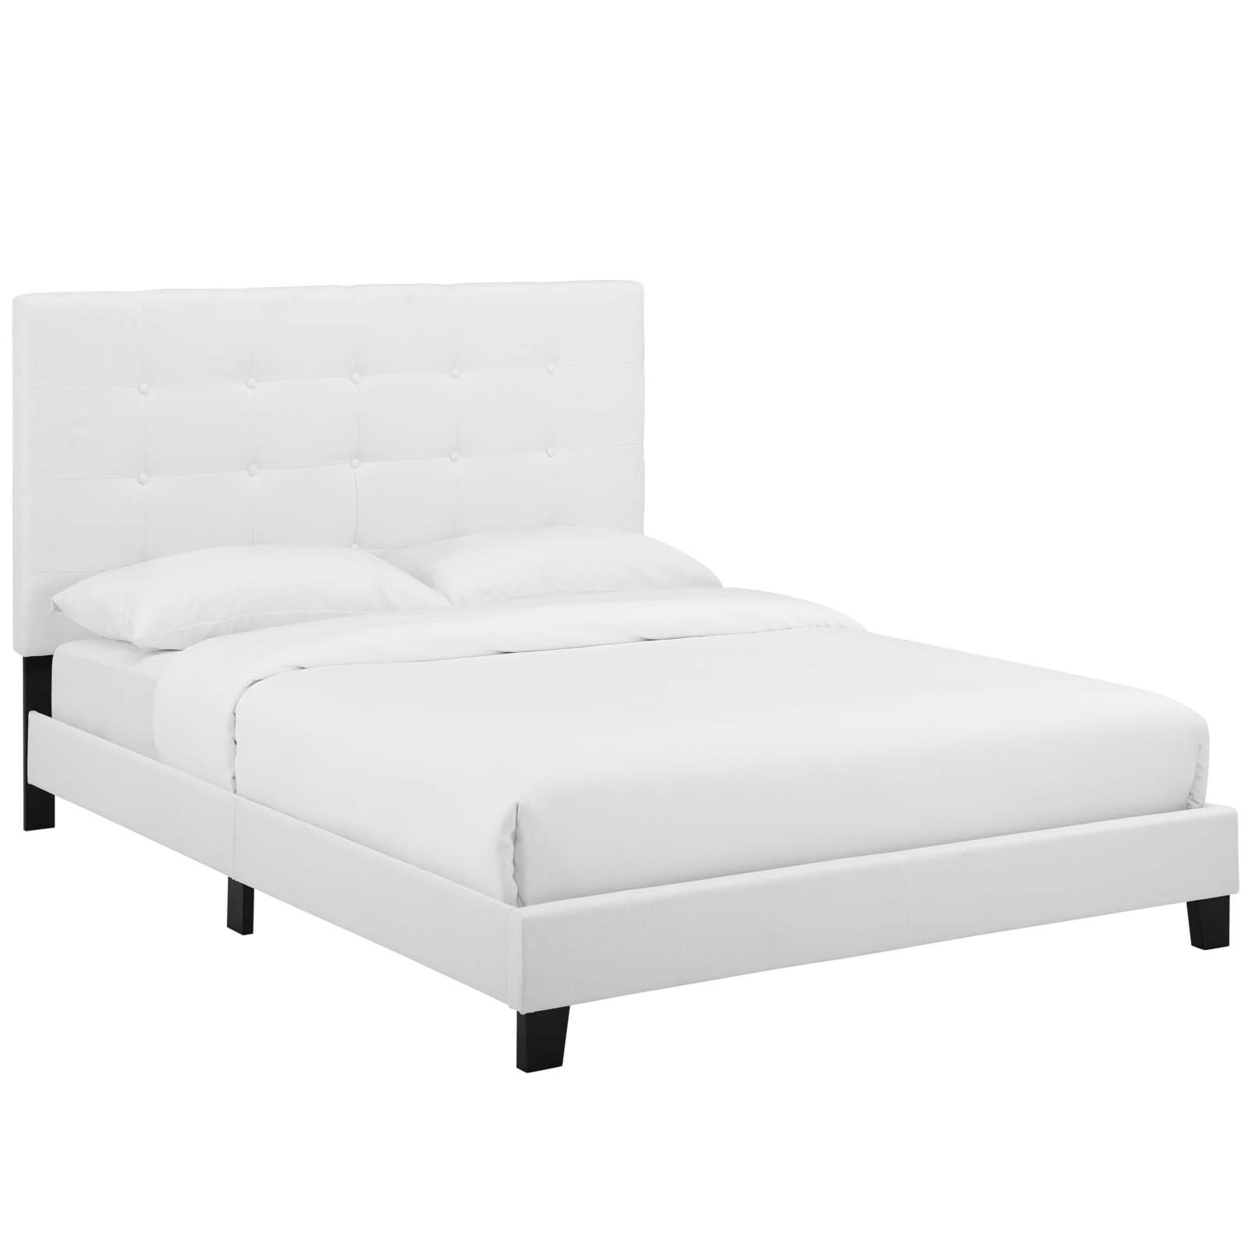 Melanie King Tufted Button Upholstered Fabric Platform Bed, White